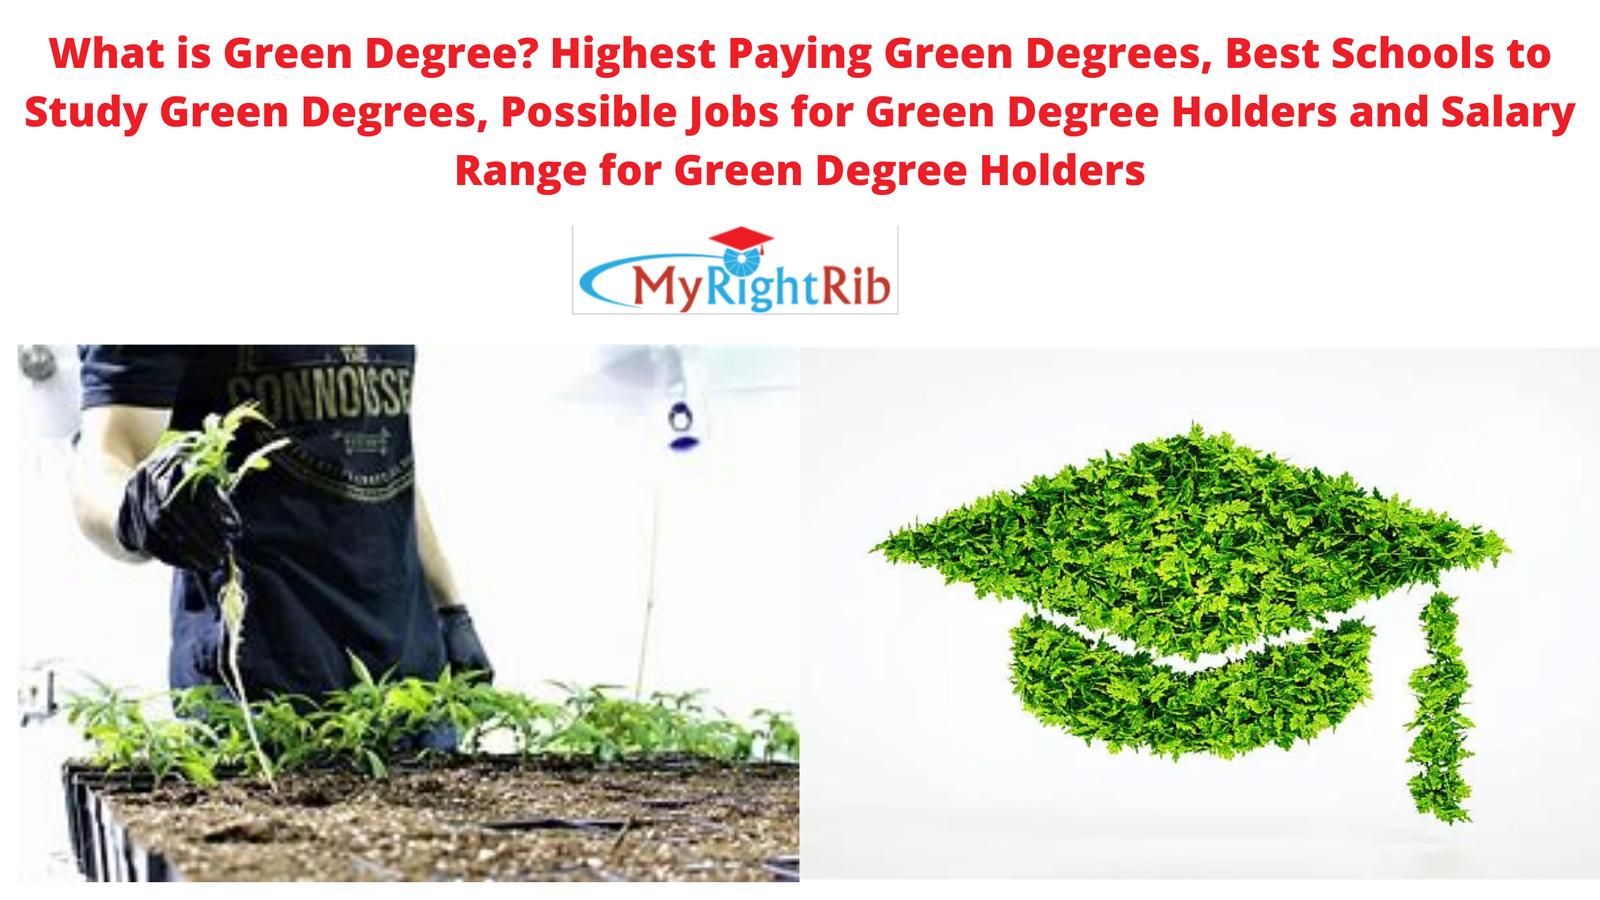 What is Green Degree? Highest Paying Green Degrees, Best Schools to Study Green Degrees, Possible Jobs for Green Degree Holders and Salary Range for Green Degree Holders